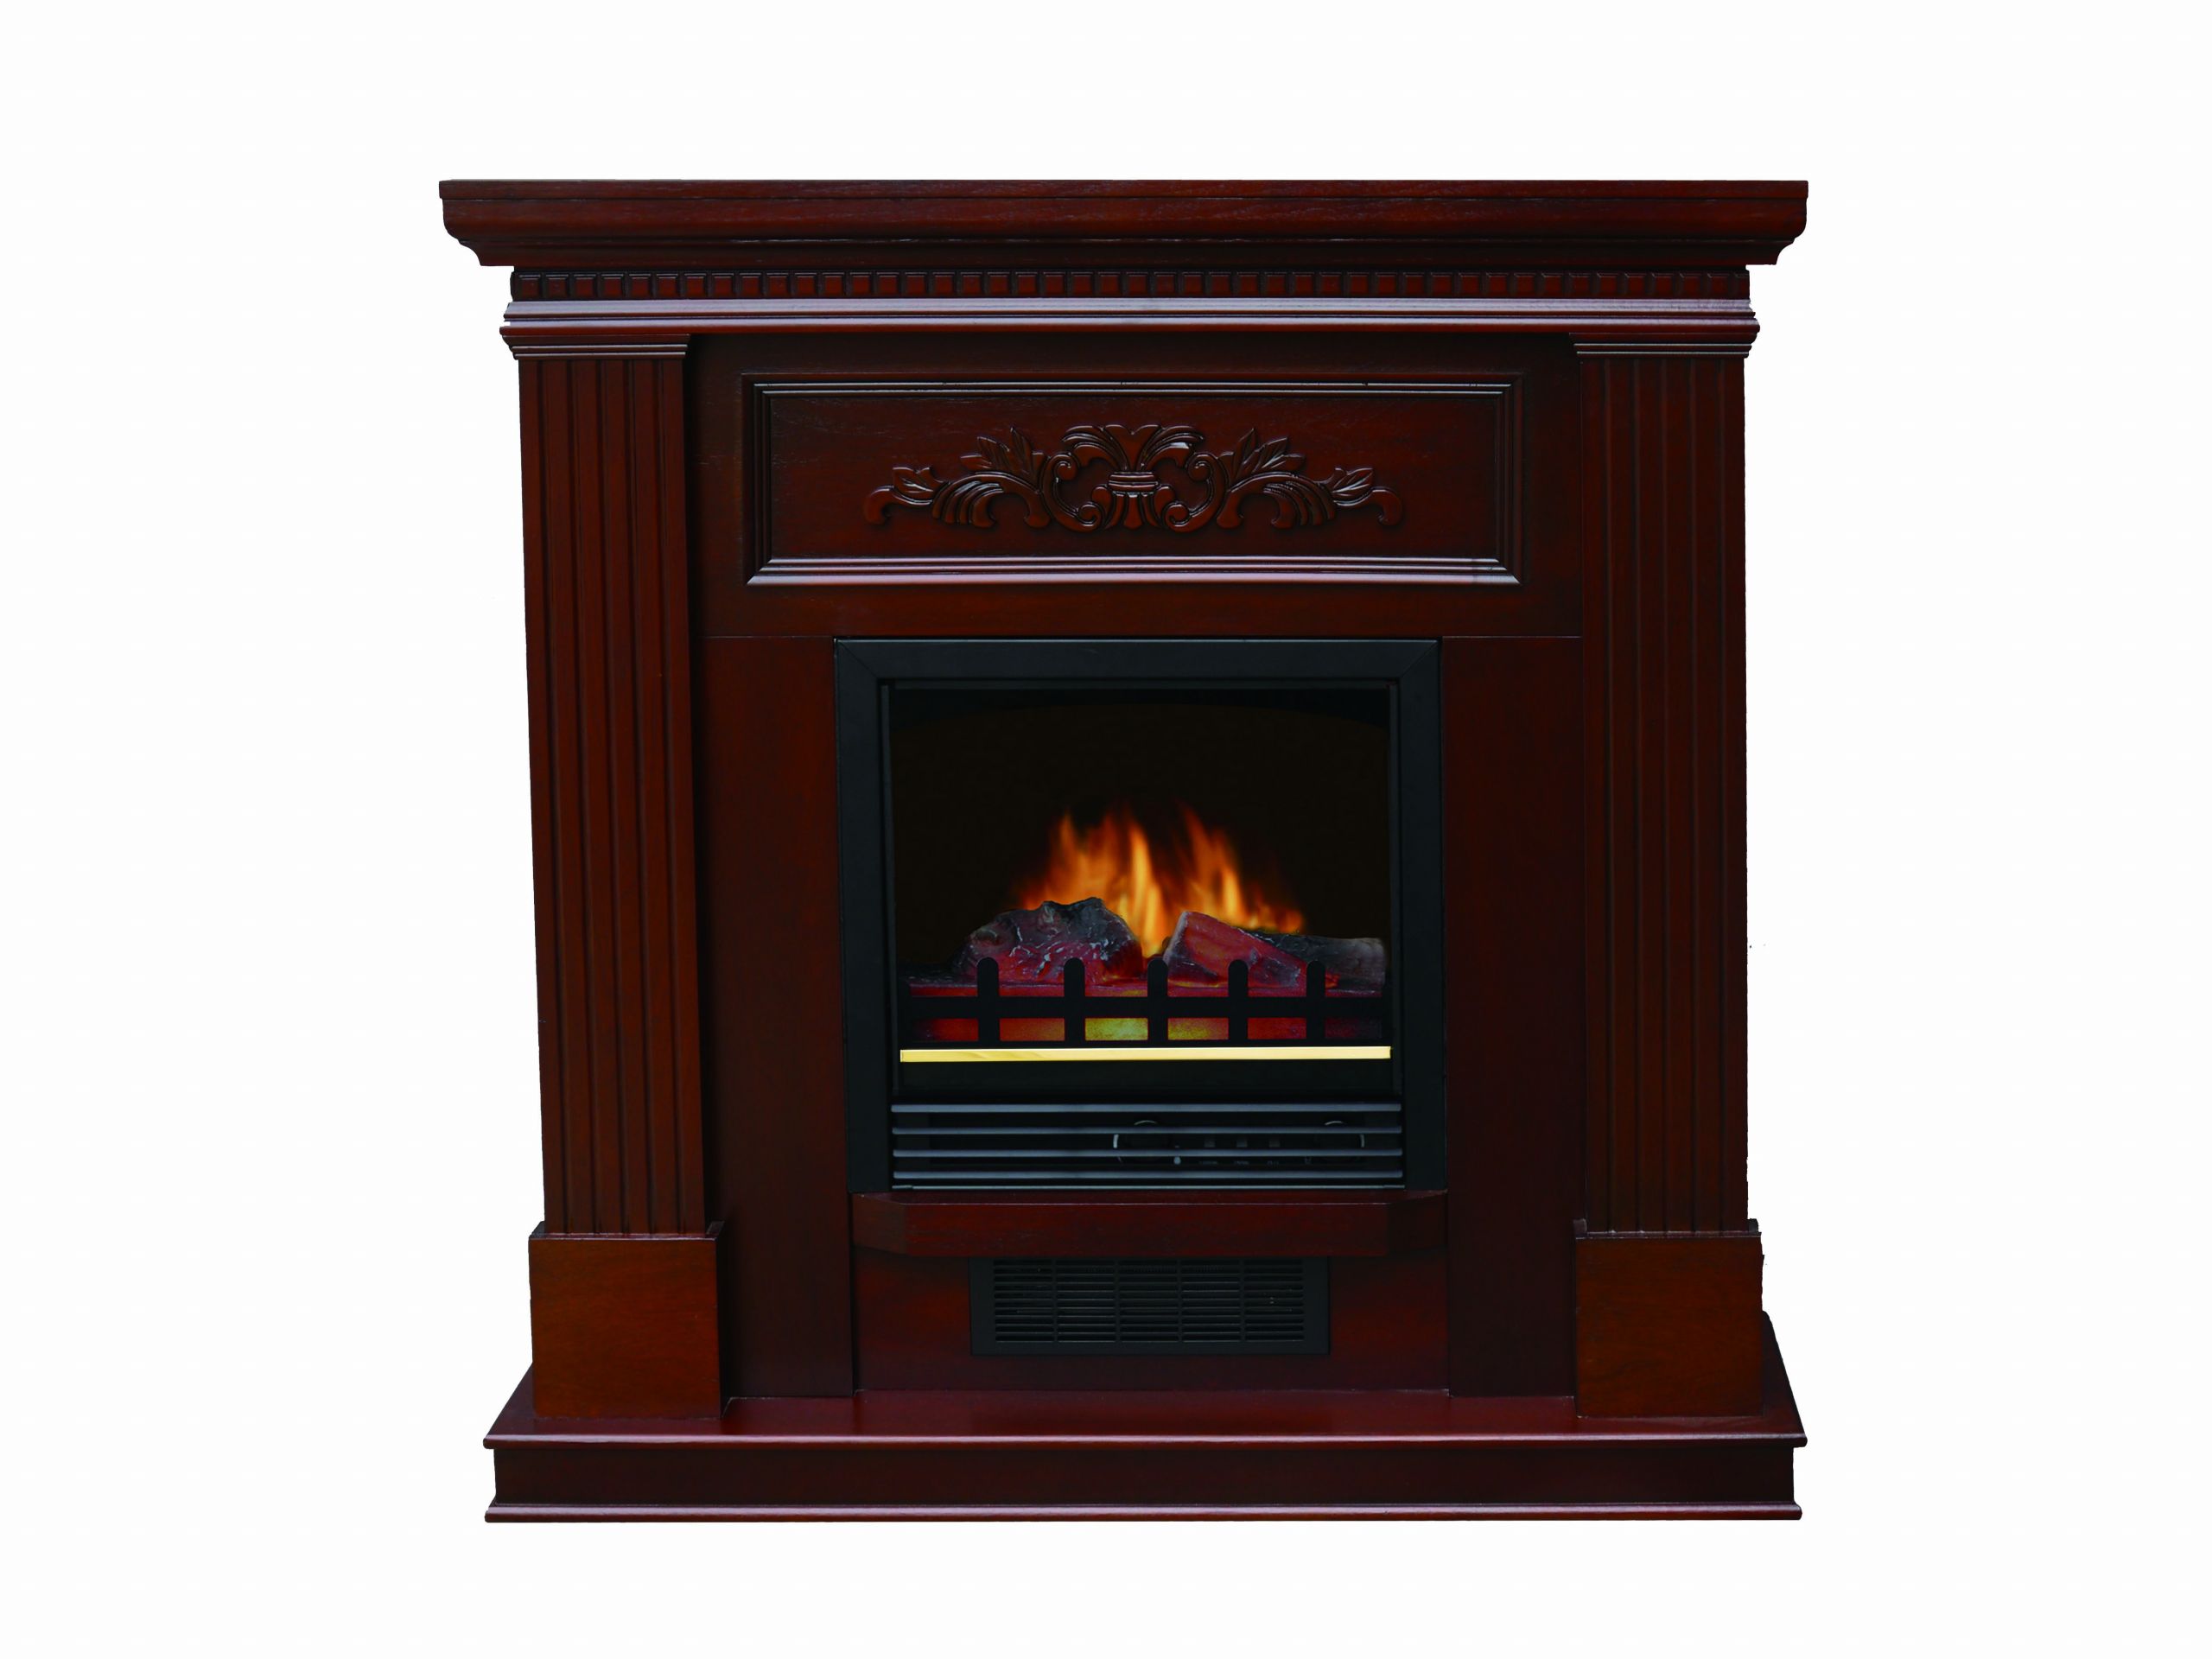 Decor Flame Electric Fireplace Manual
 See more Hot 100 Heaters